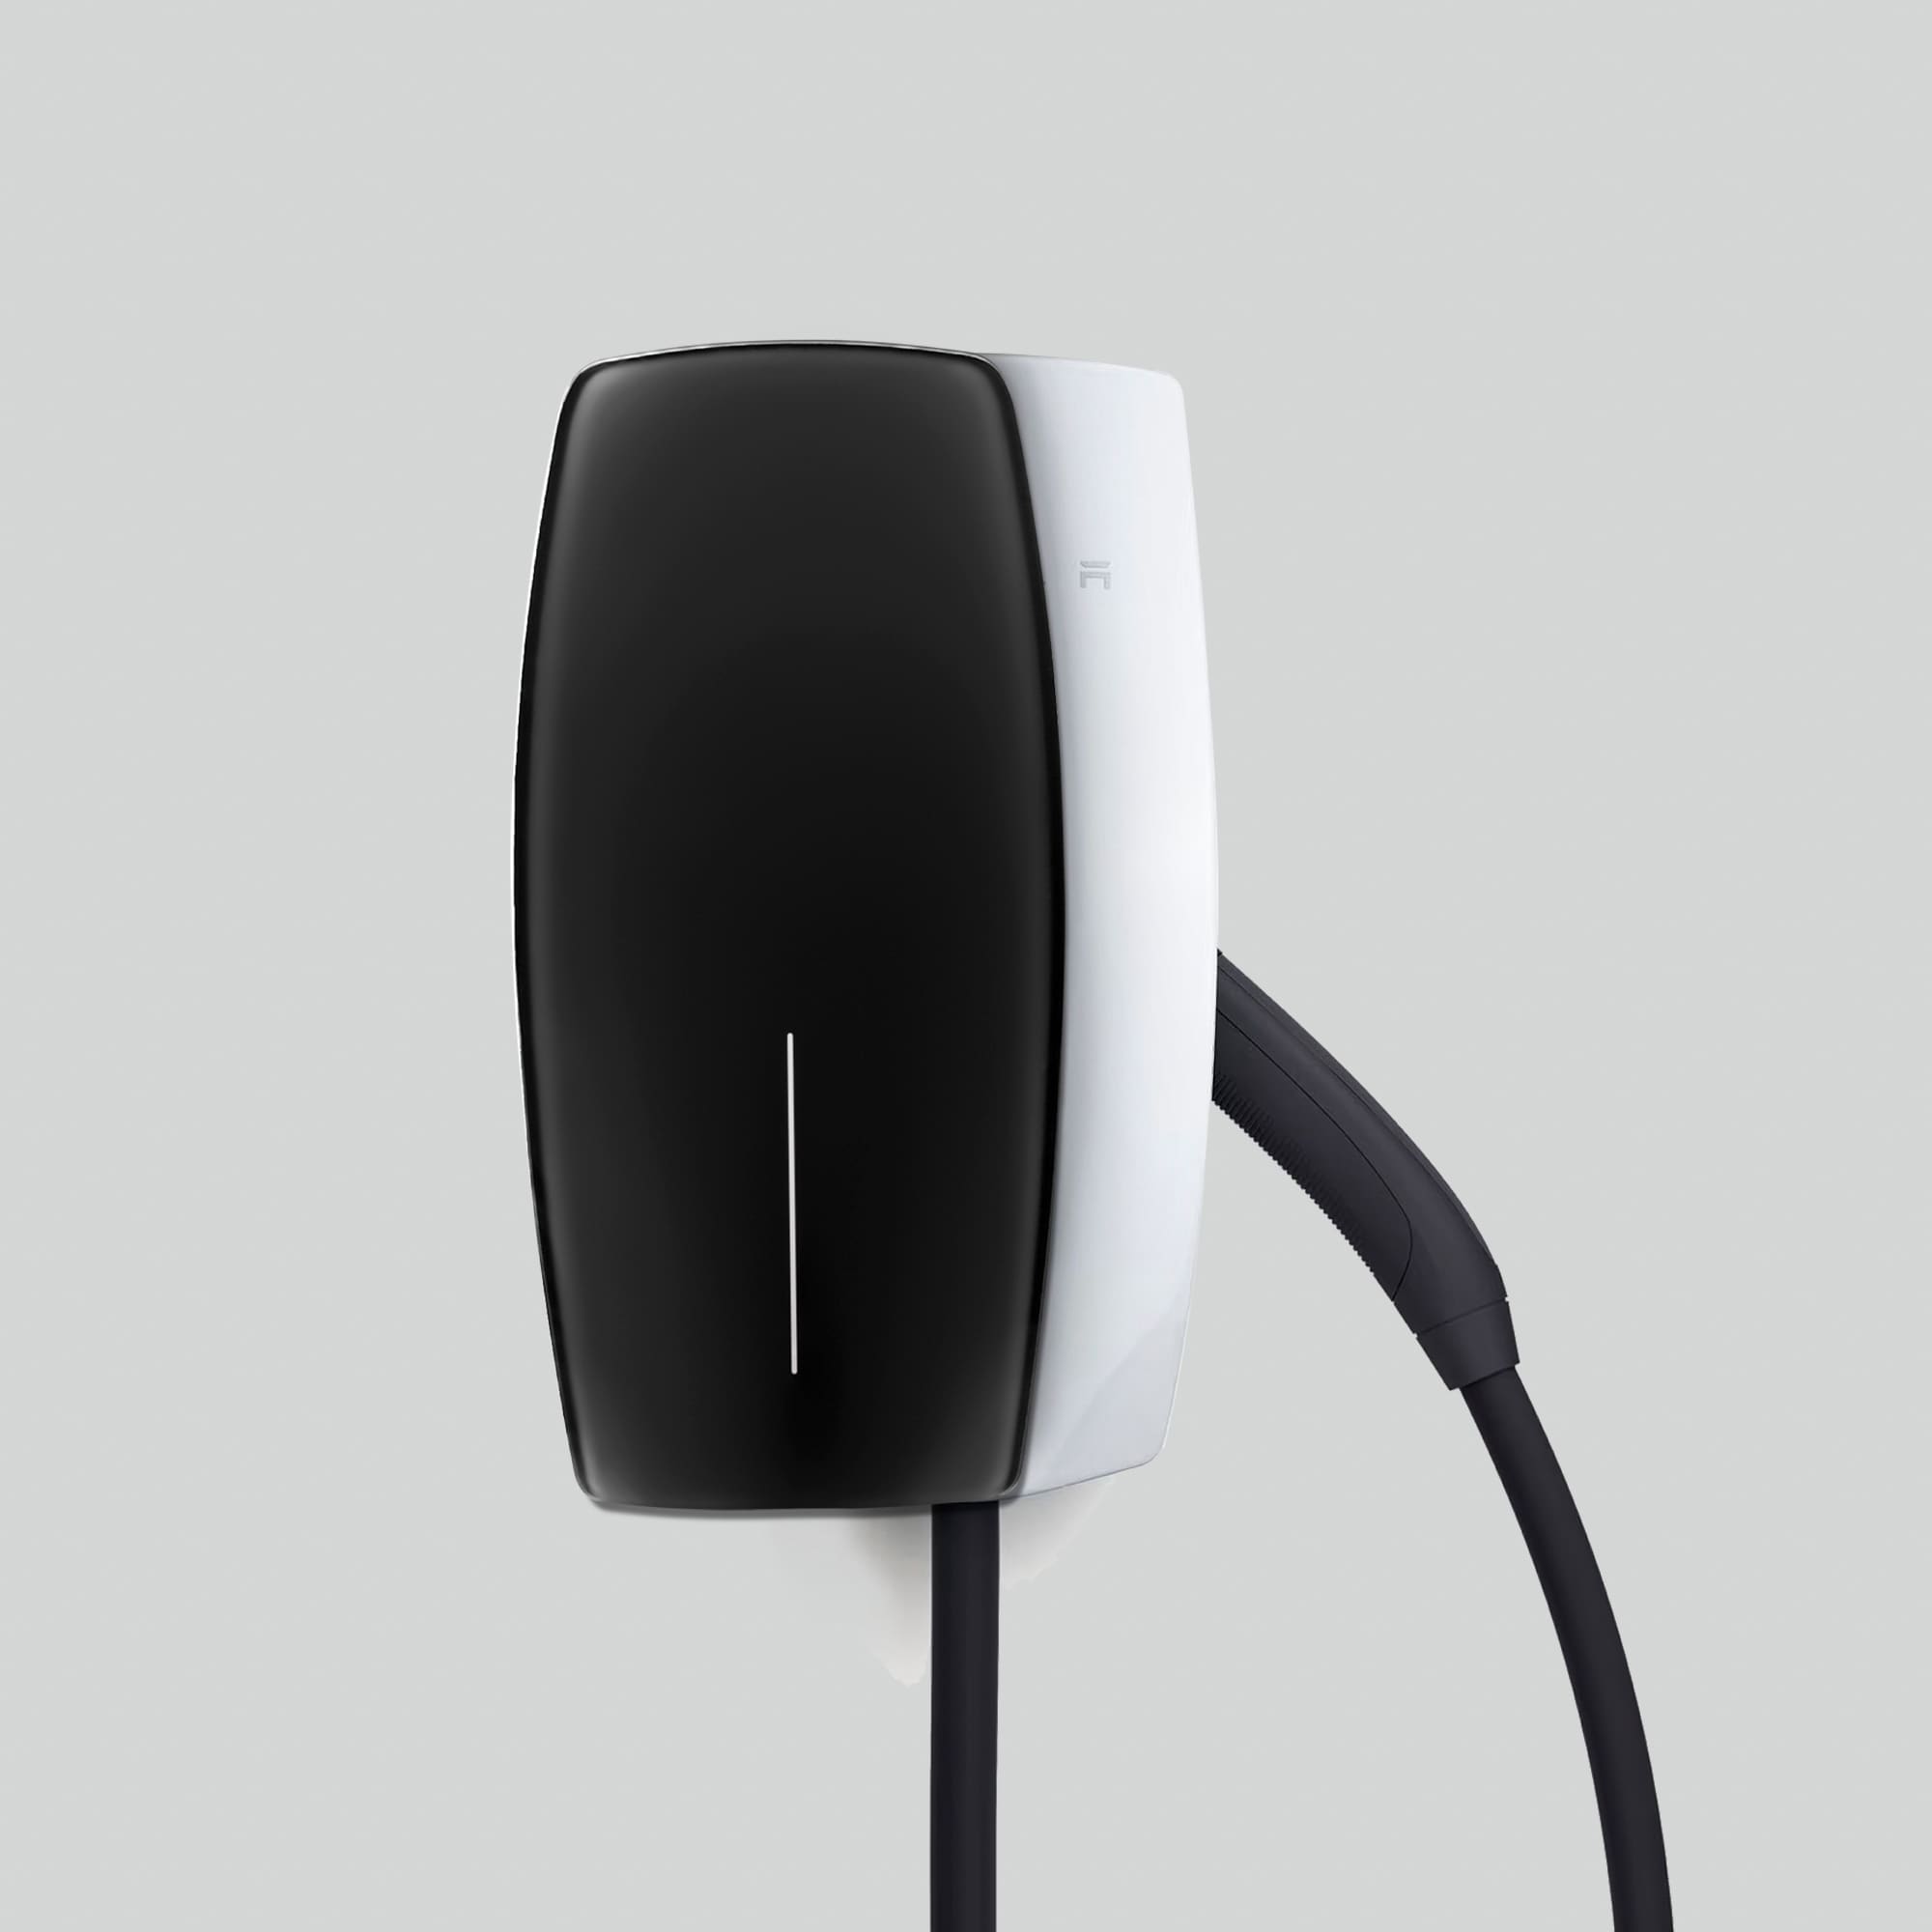 LECTRON Tesla Wall Charger Faceplate - Tesla Gen 3 Wall Connector